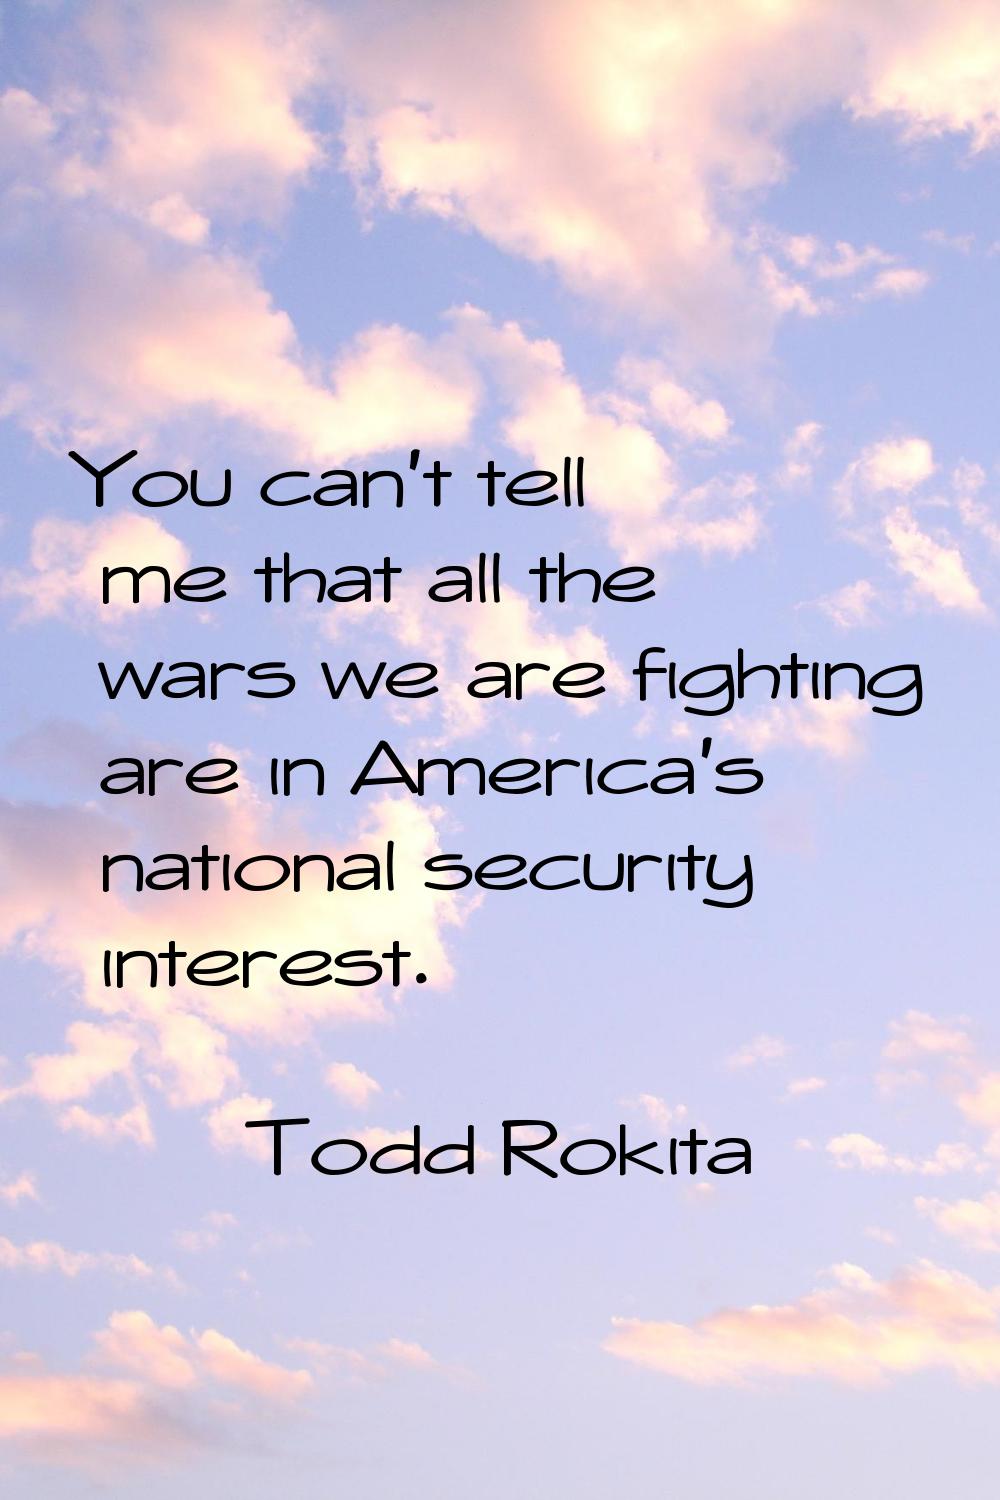 You can't tell me that all the wars we are fighting are in America's national security interest.